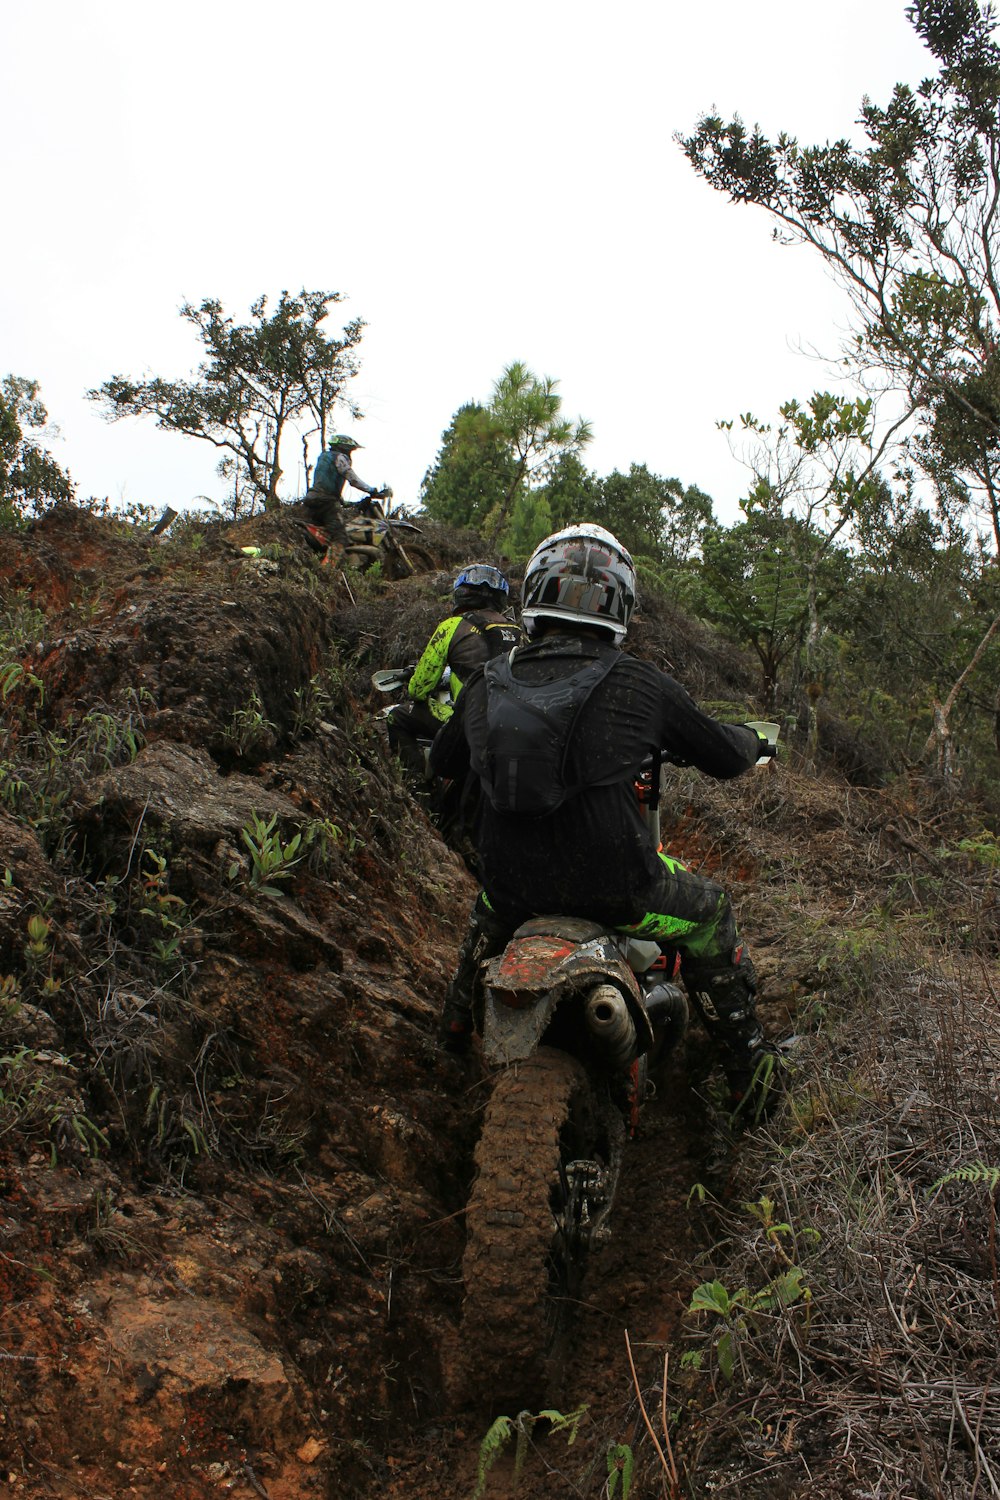 a group of people riding dirt bikes